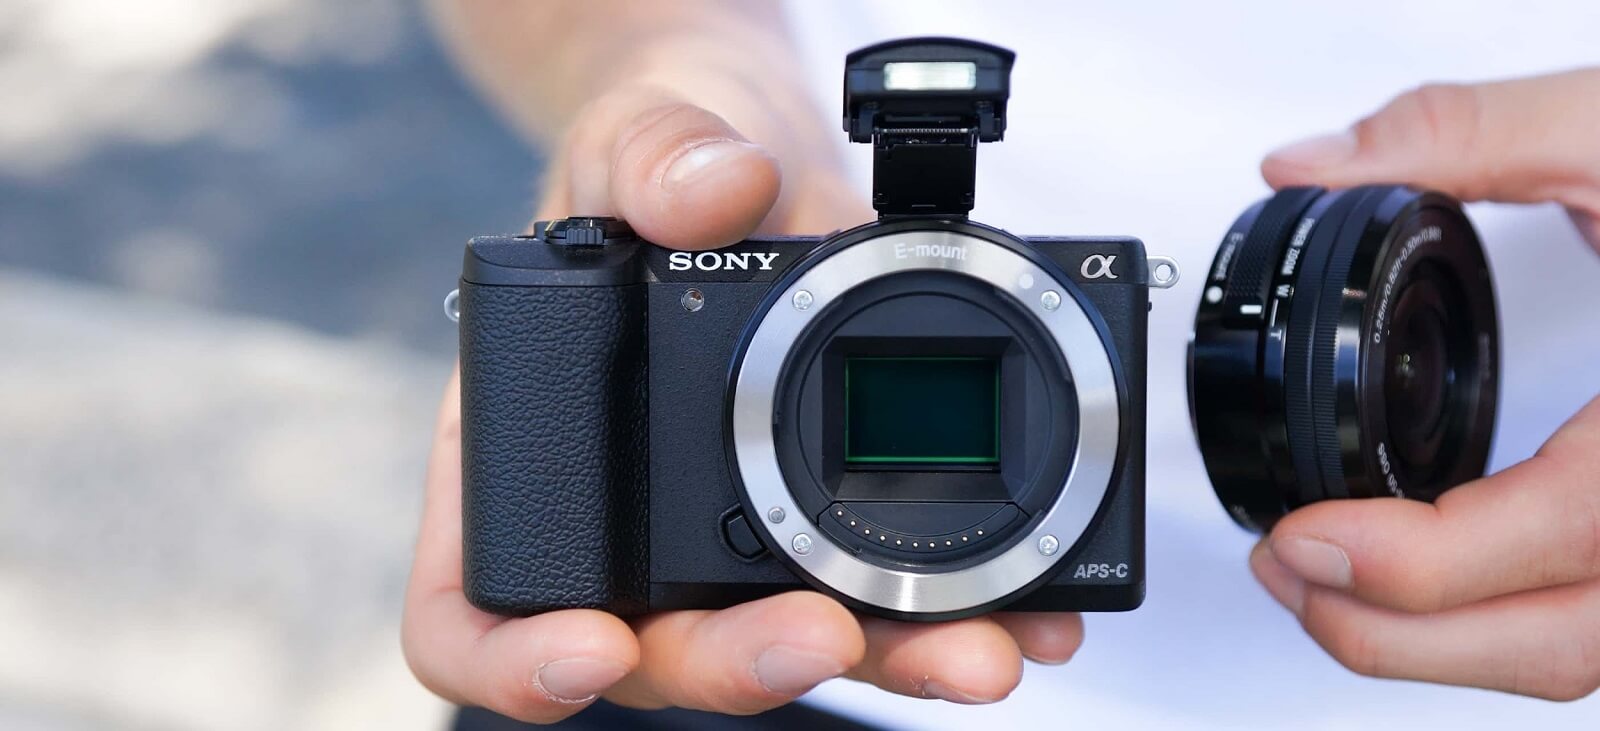 Best Streaming Cameras of 2020 - Sony A5100